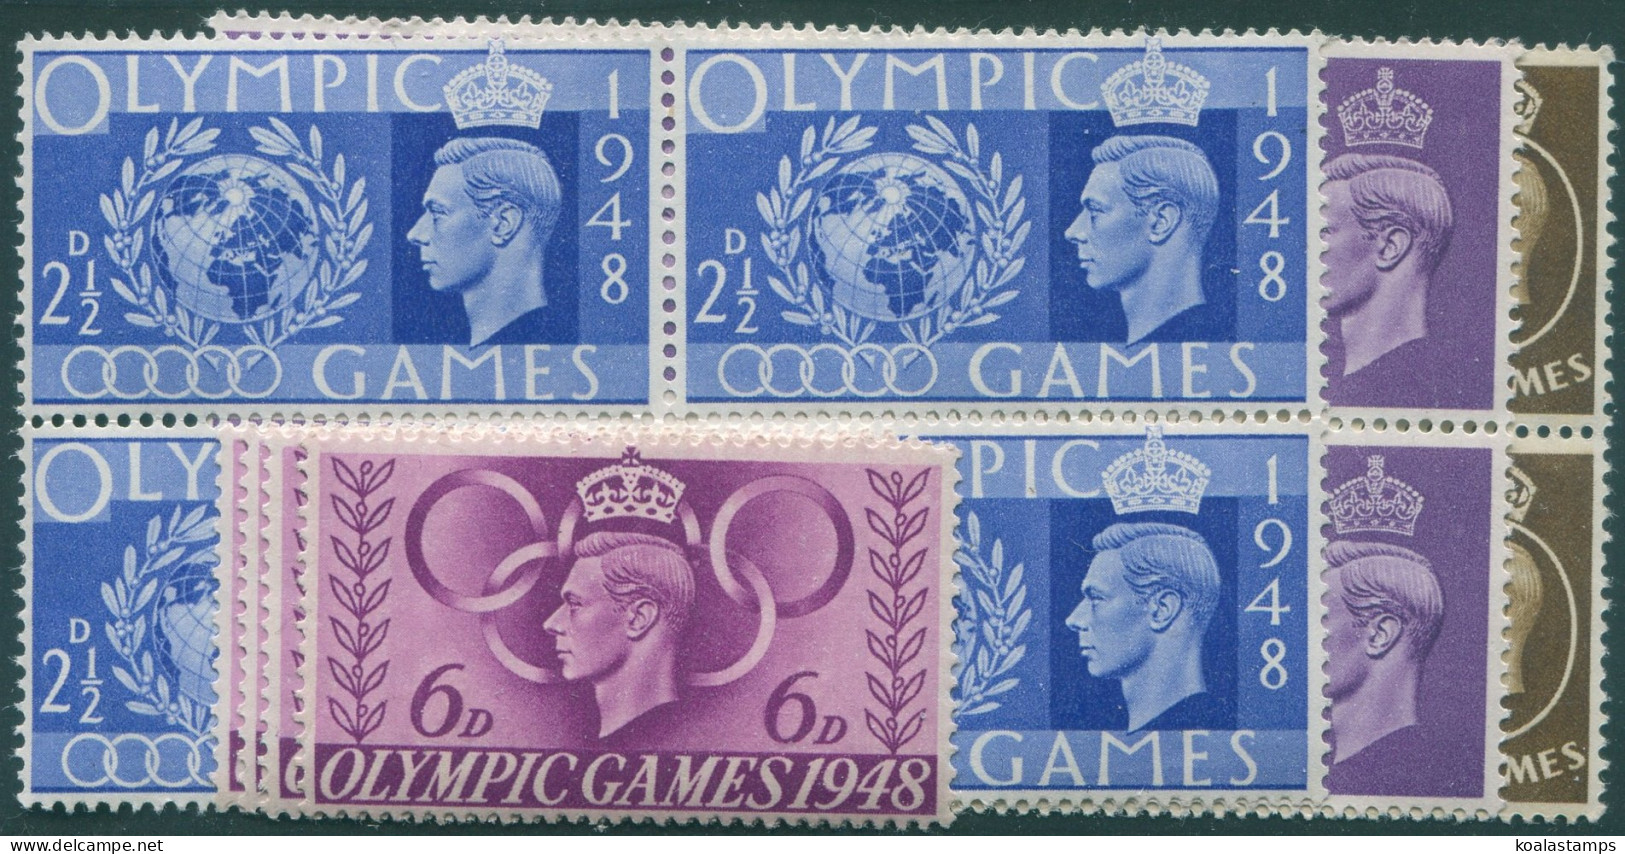 Great Britain 1948 SG495-498 KGVI Olympic Games 4 Sets MNH (amd) - Unclassified